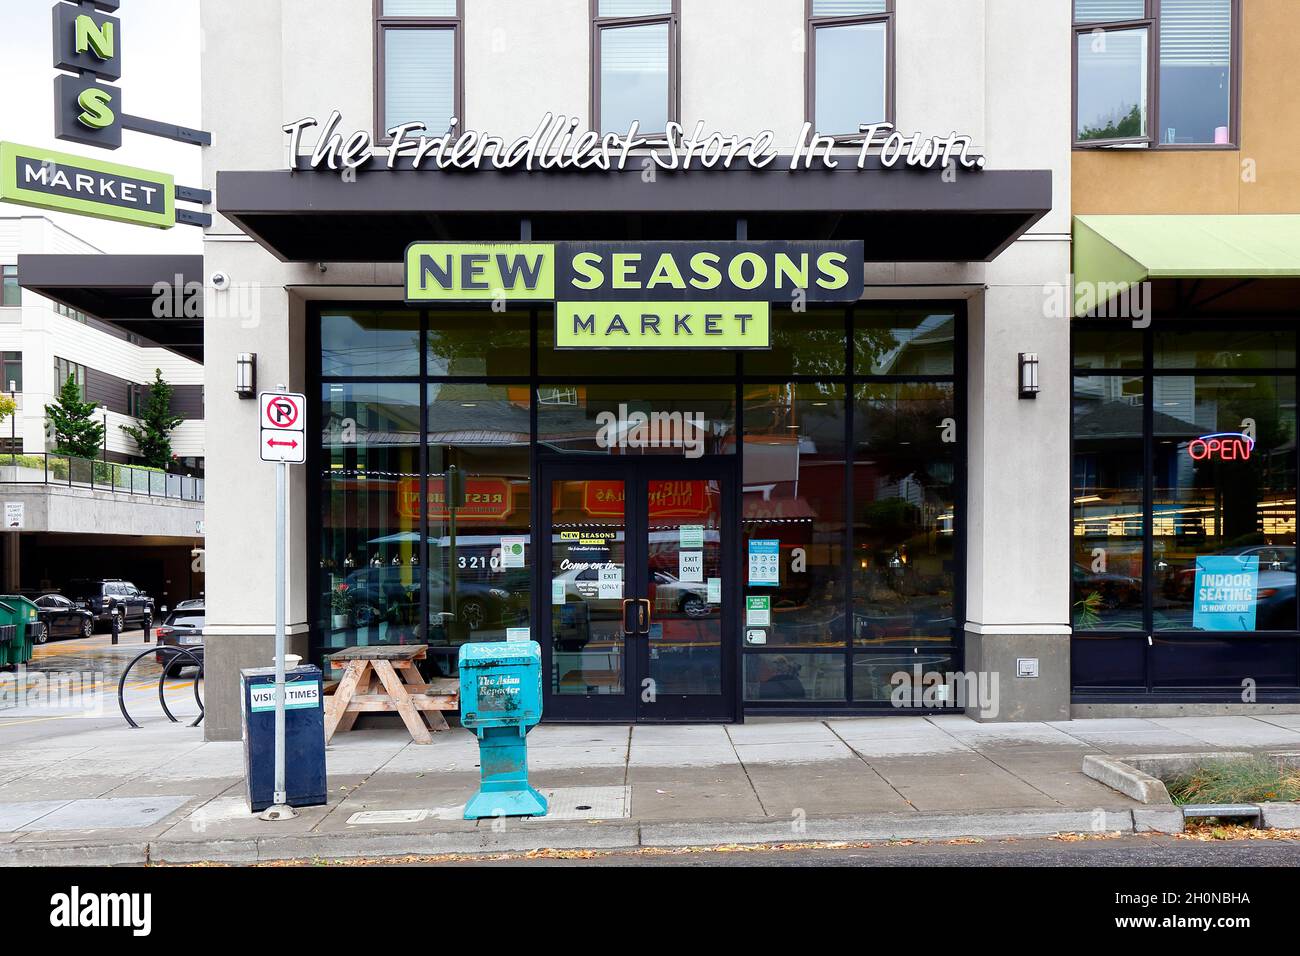 New Seasons Market, 3210 NE Broadway, Portland, Oregon. exterior storefront of a supermarket specializing in locally sourced food items. Stock Photo